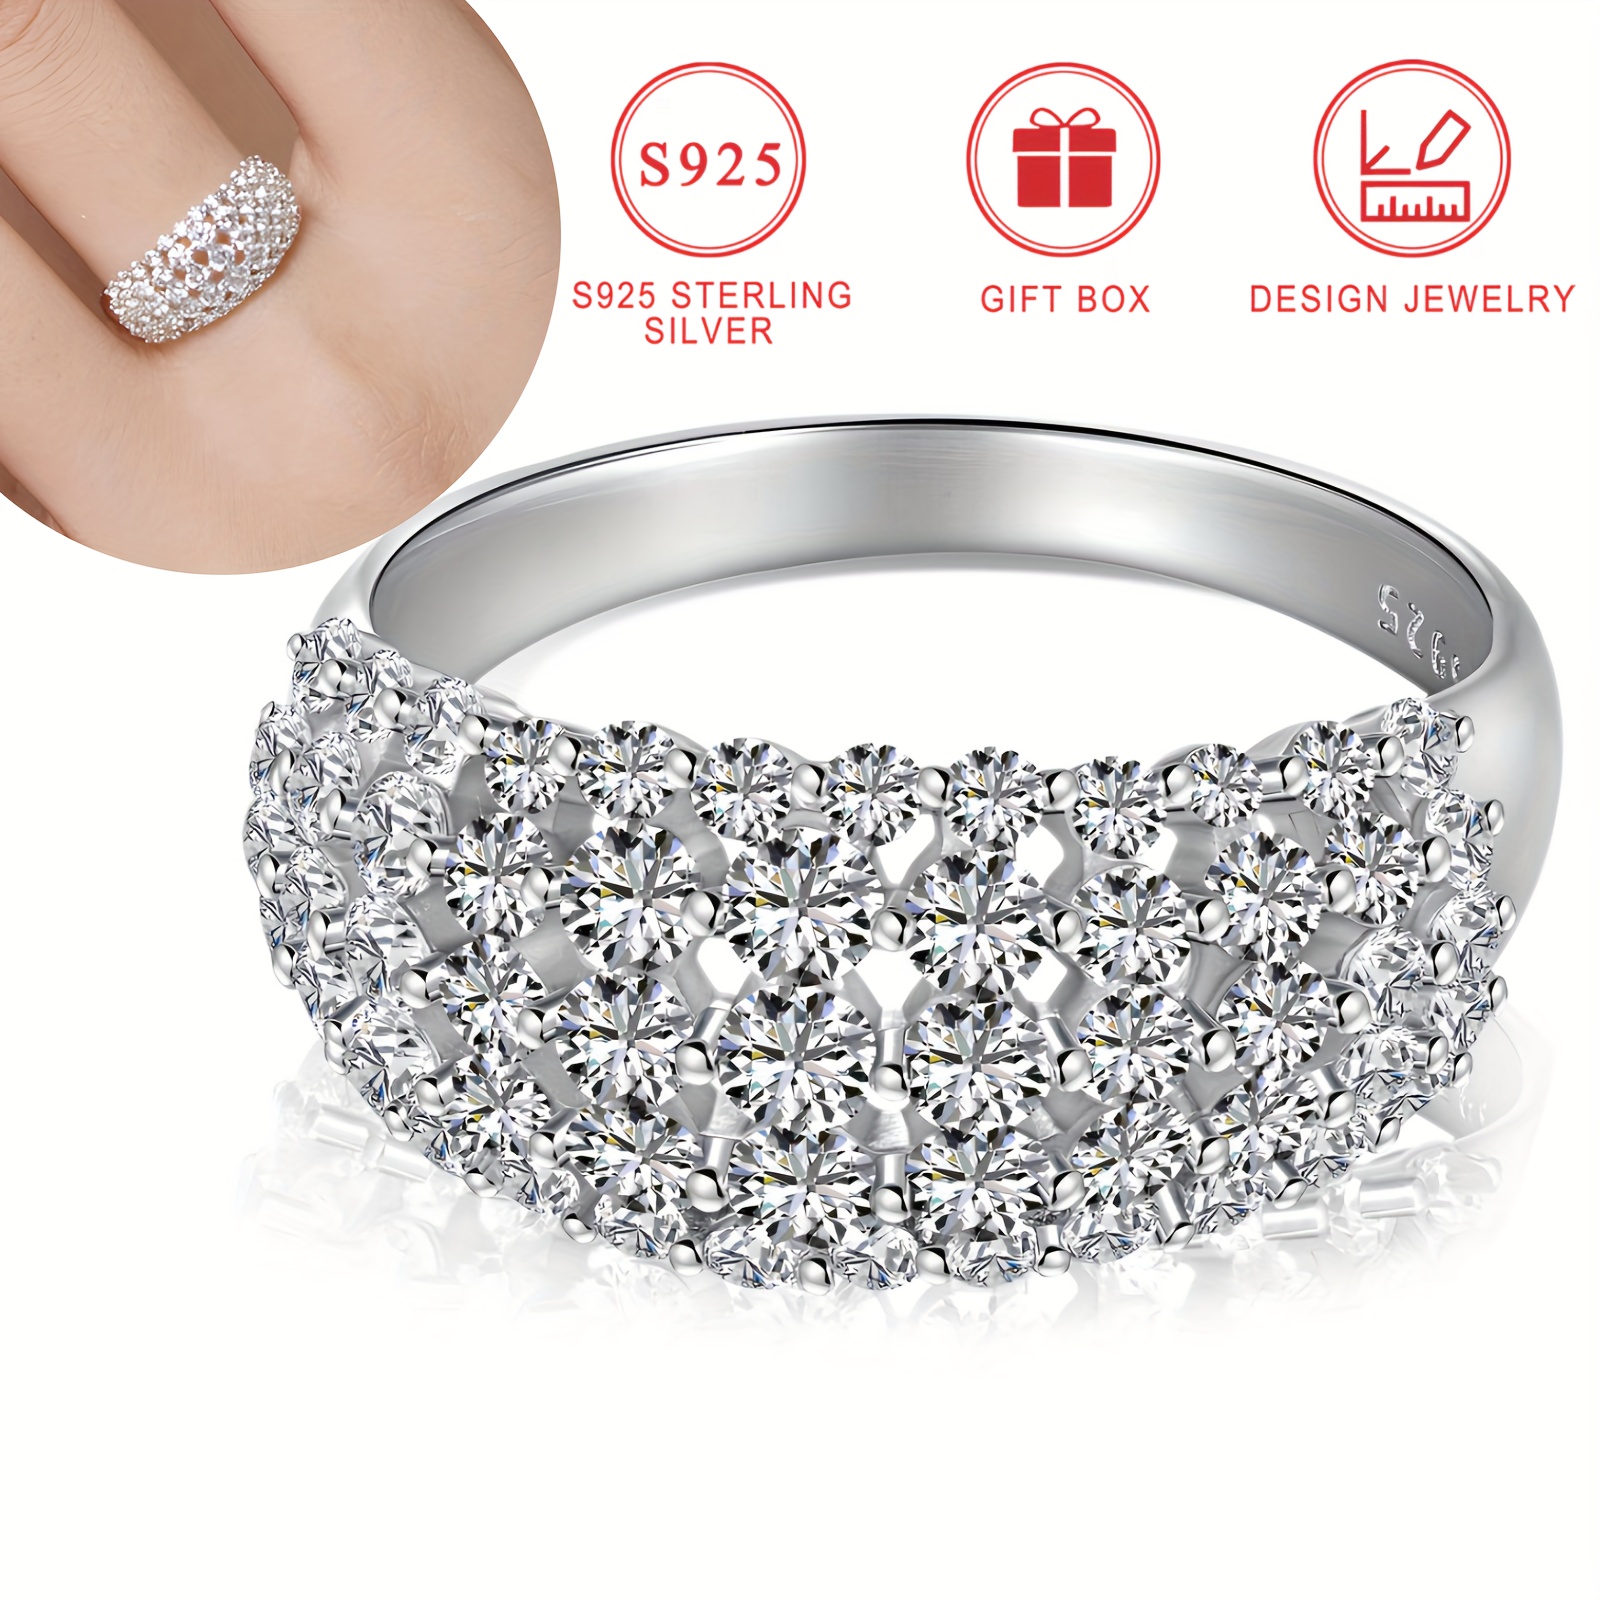 

Sterling Silver S925 Wide Band Women's Ring, Curved Pave Set 5a Cubic Zirconia, Elegant & Bling Fashion Design High-quality Jewelry, Perfect Gift With Box